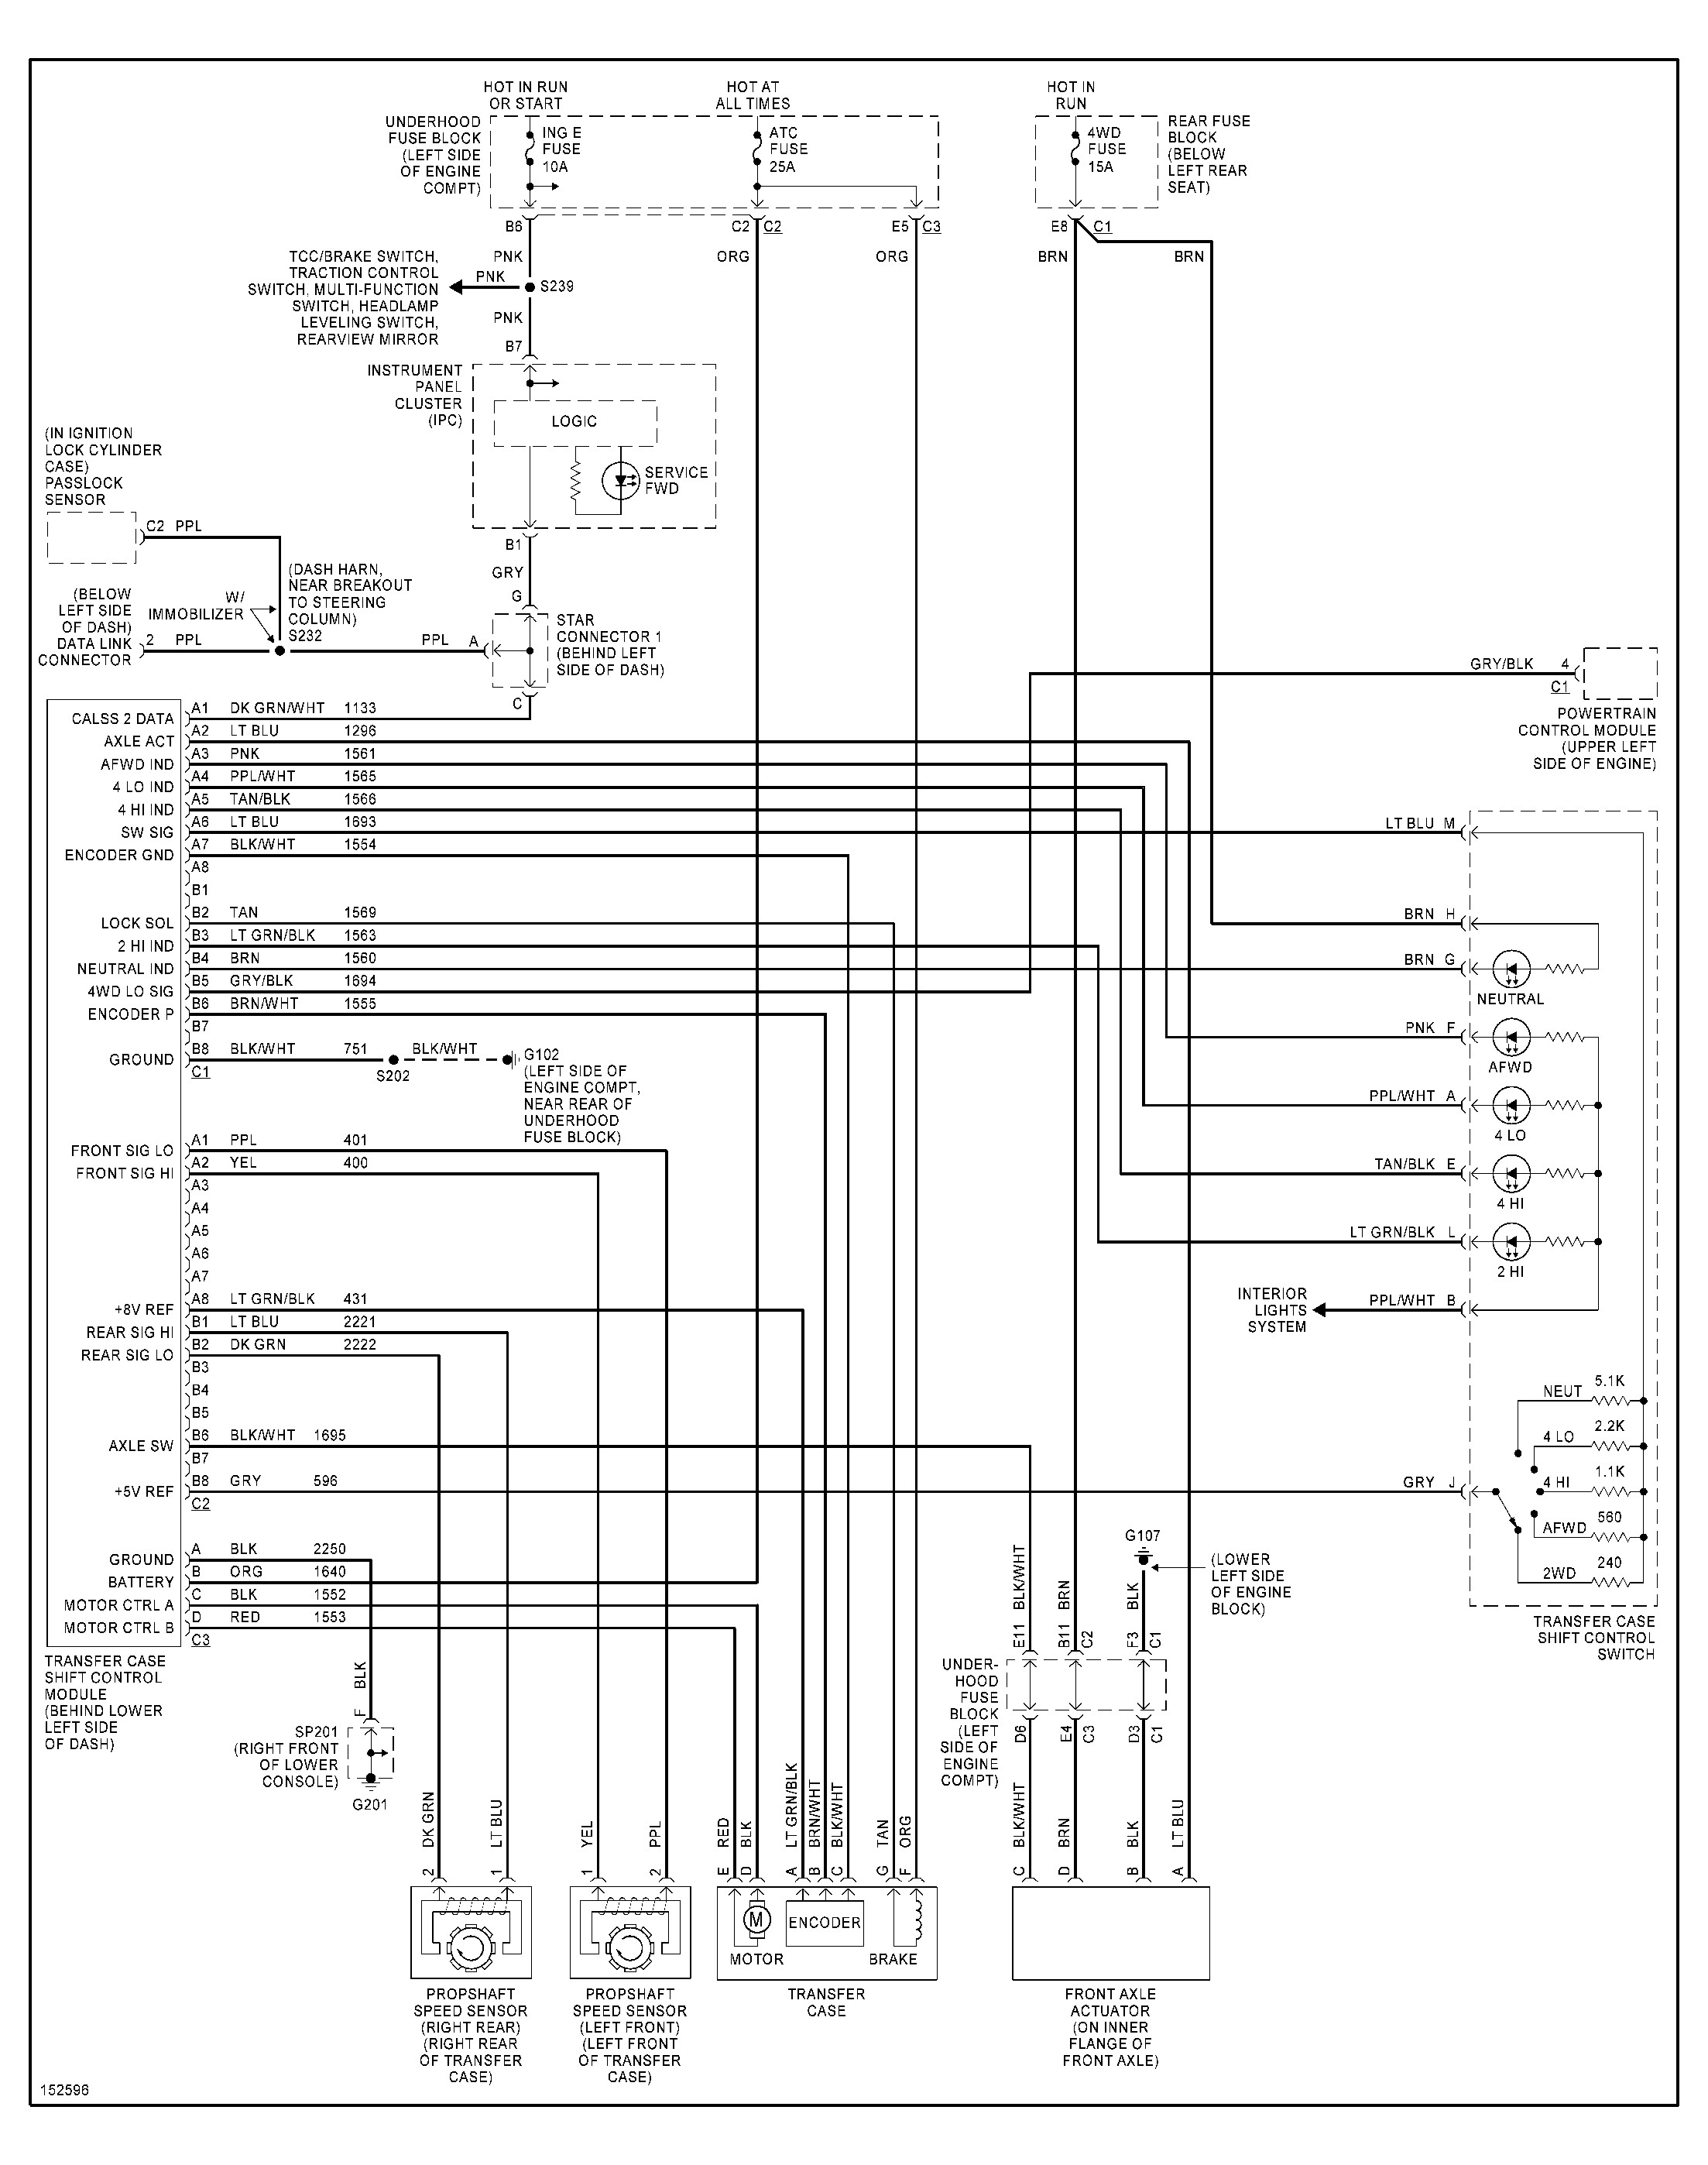 2002 Cherokee Coolinf Fan Wiring Diagram for the 2002 Chevrolet Trailblazer 4wd Wiring Diagram Guide Of 2002 Cherokee Coolinf Fan Wiring Diagram